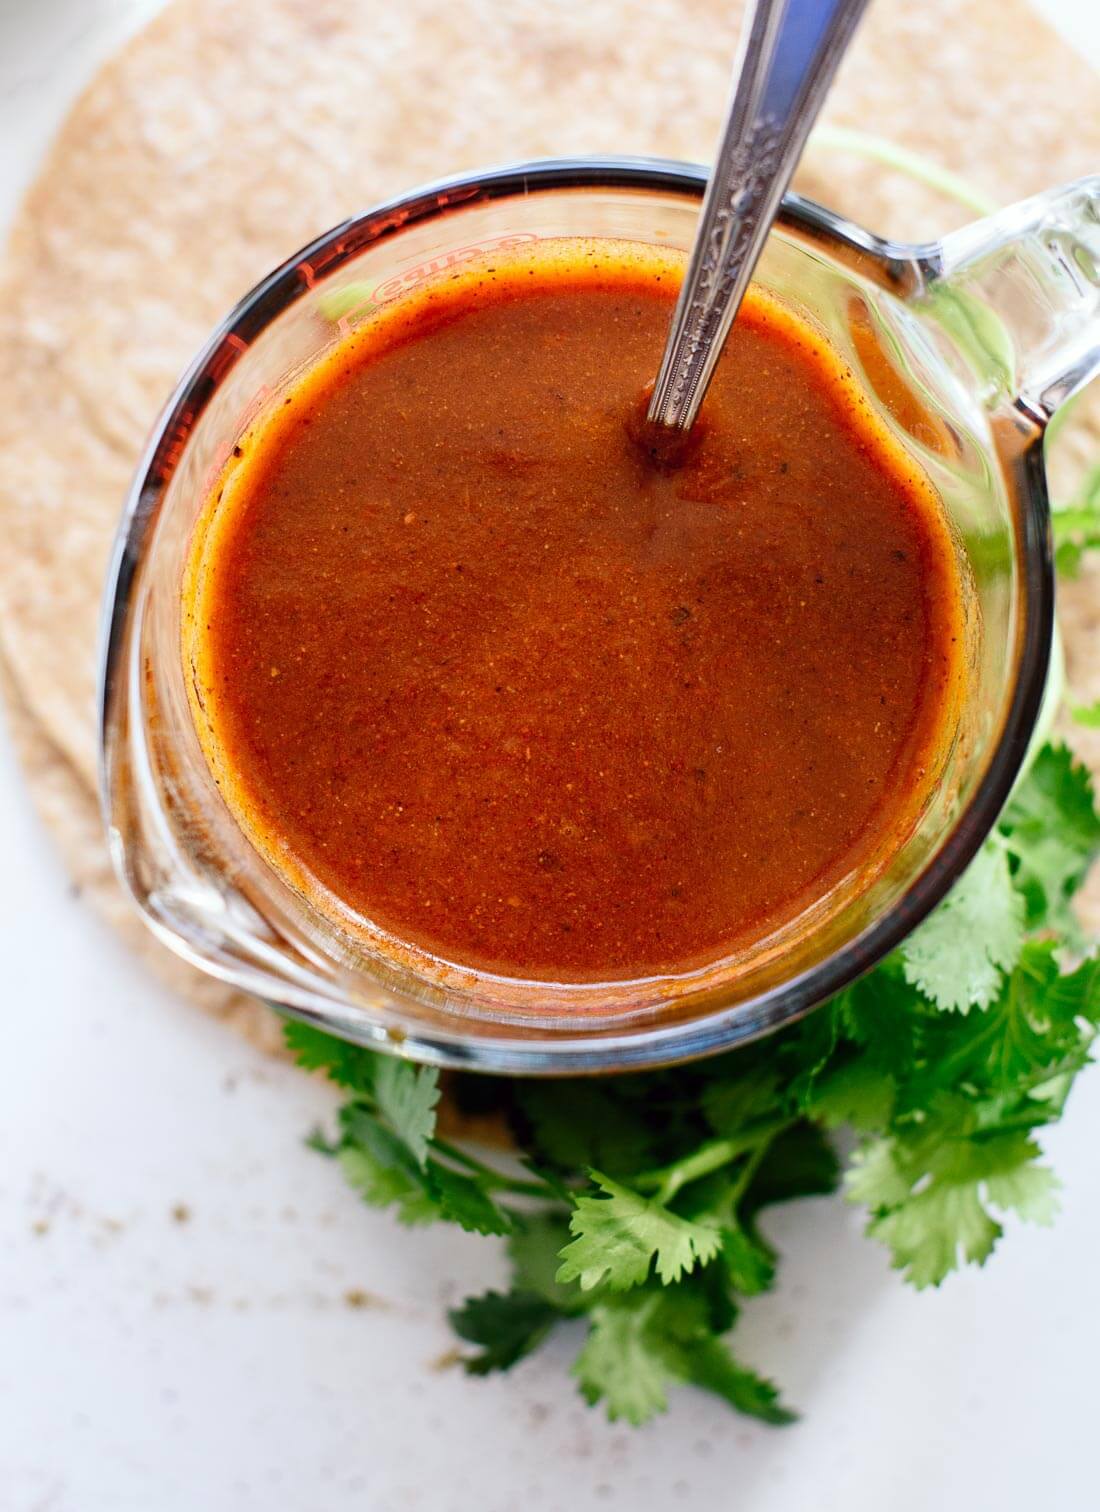 Homemade enchilada sauce is so easy to make! This sauce tastes so good, you